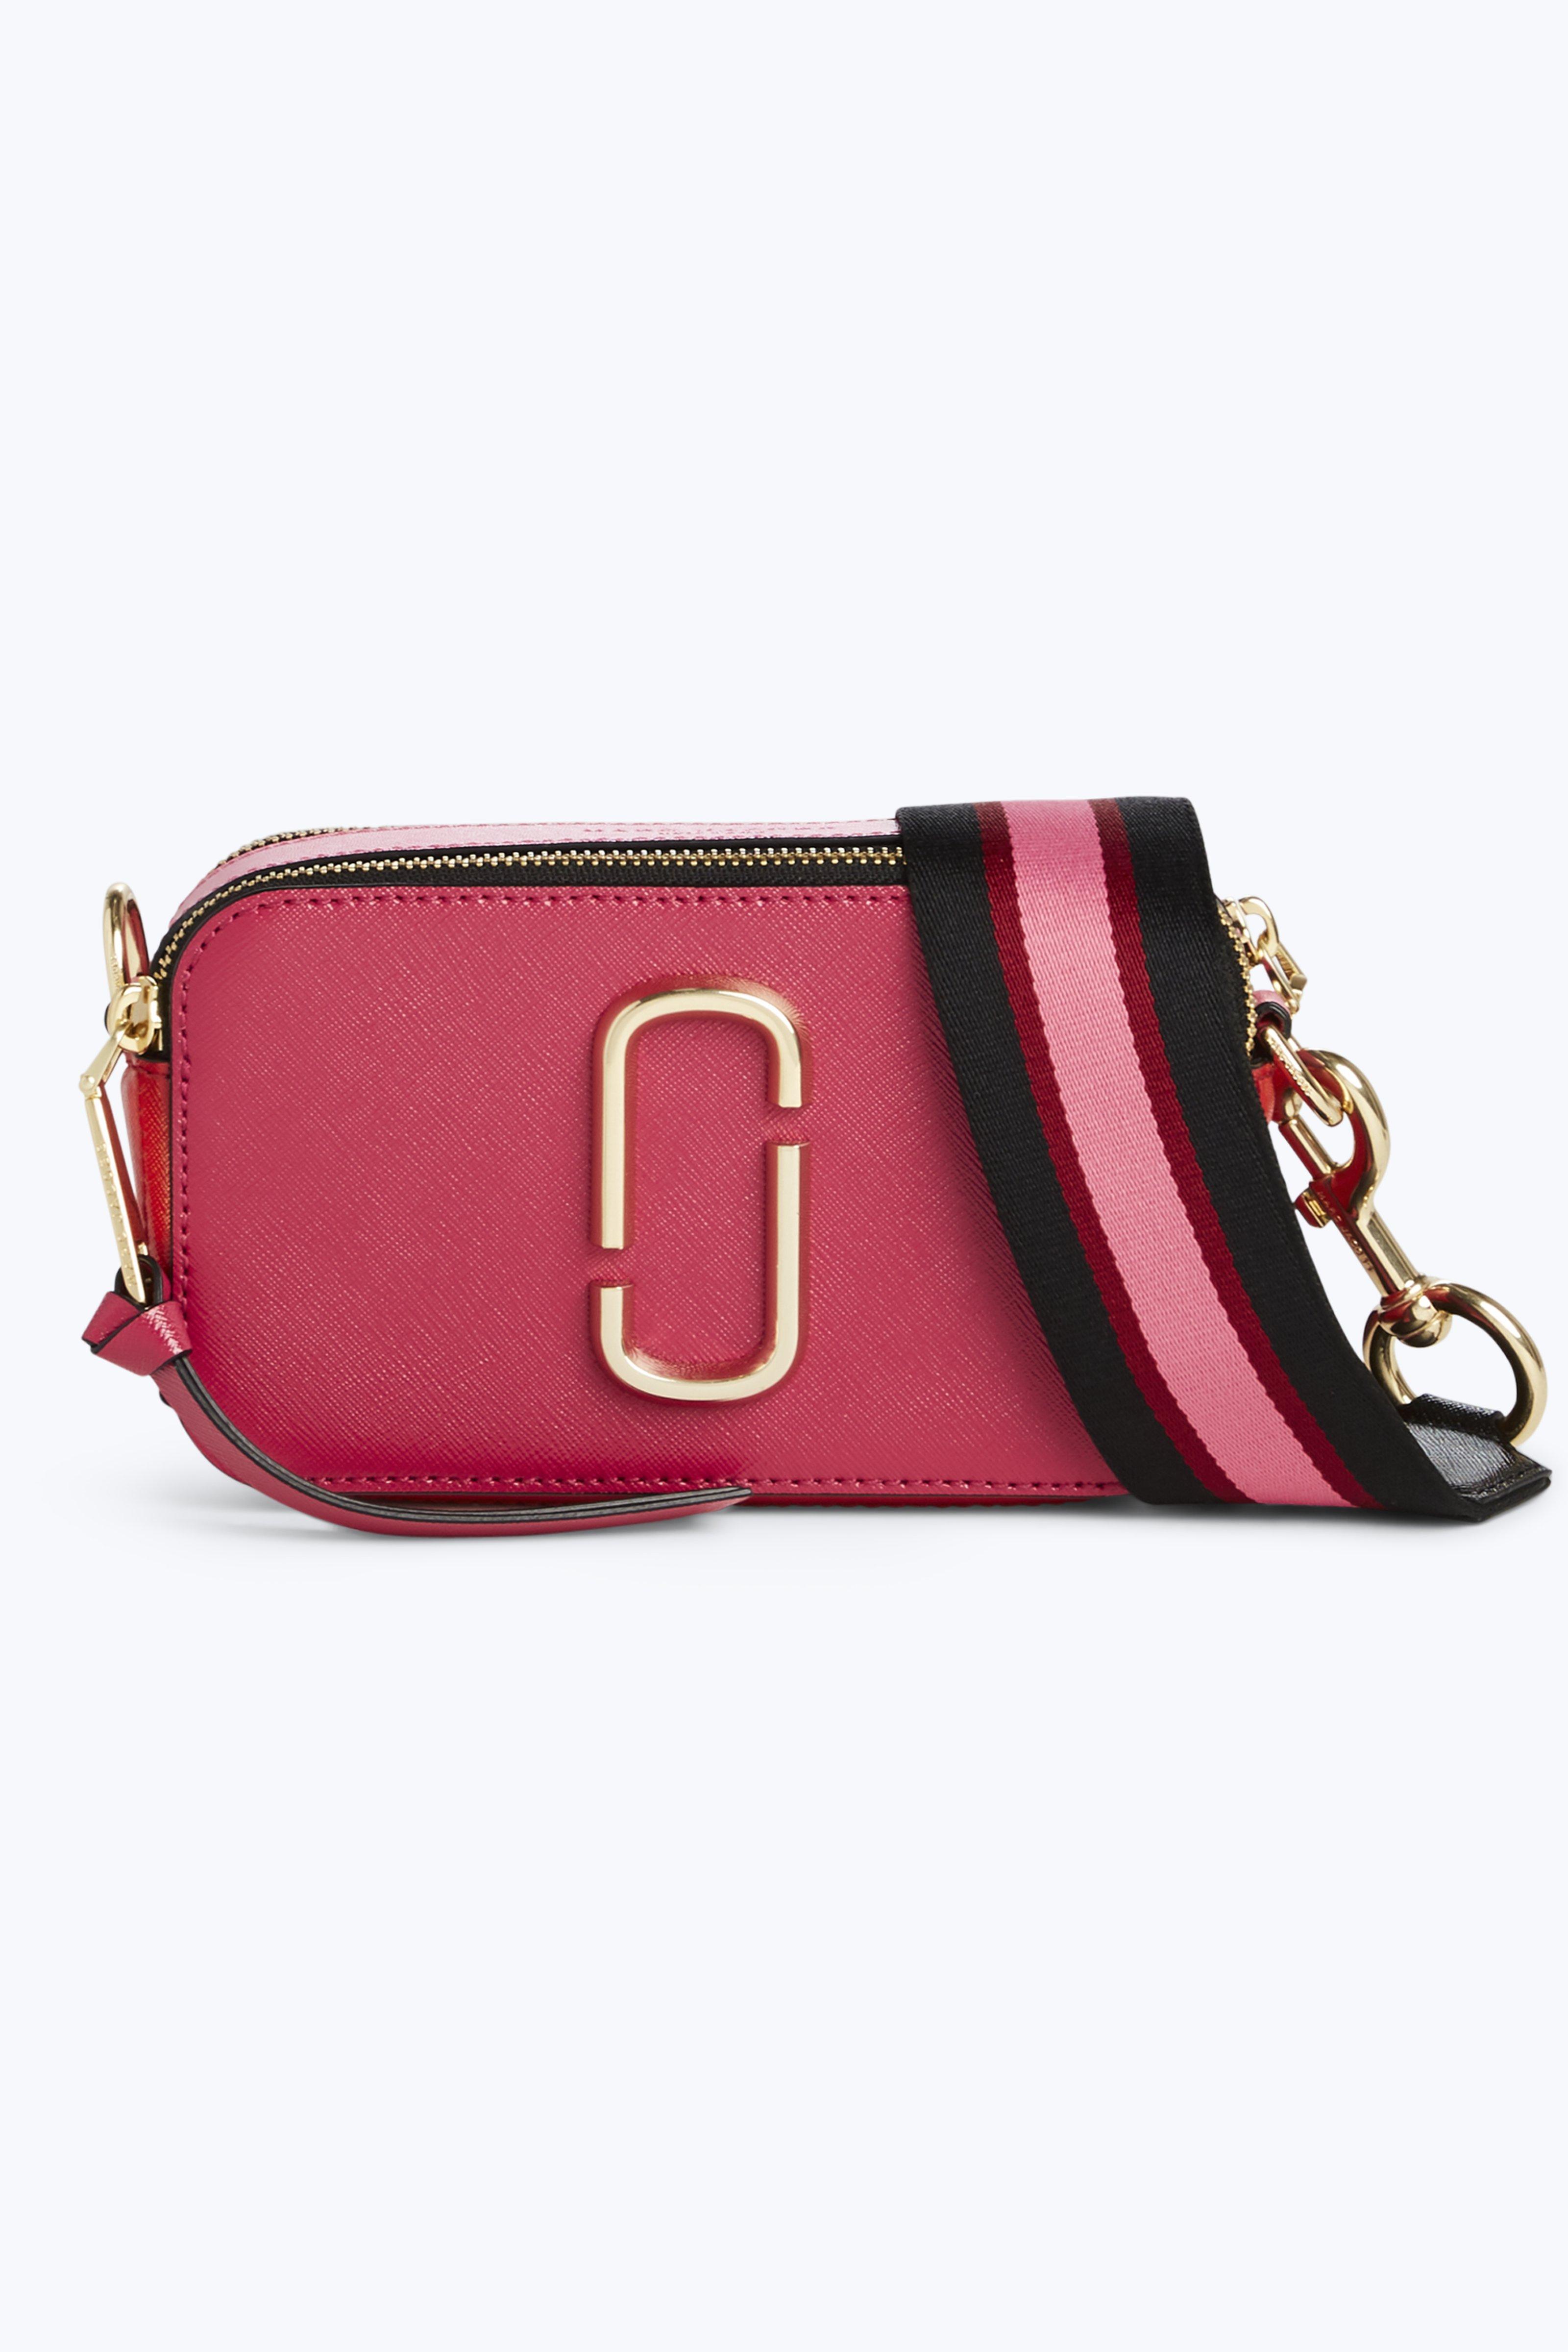 Lyst - Marc Jacobs Snapshot Small Camera Bag in Red